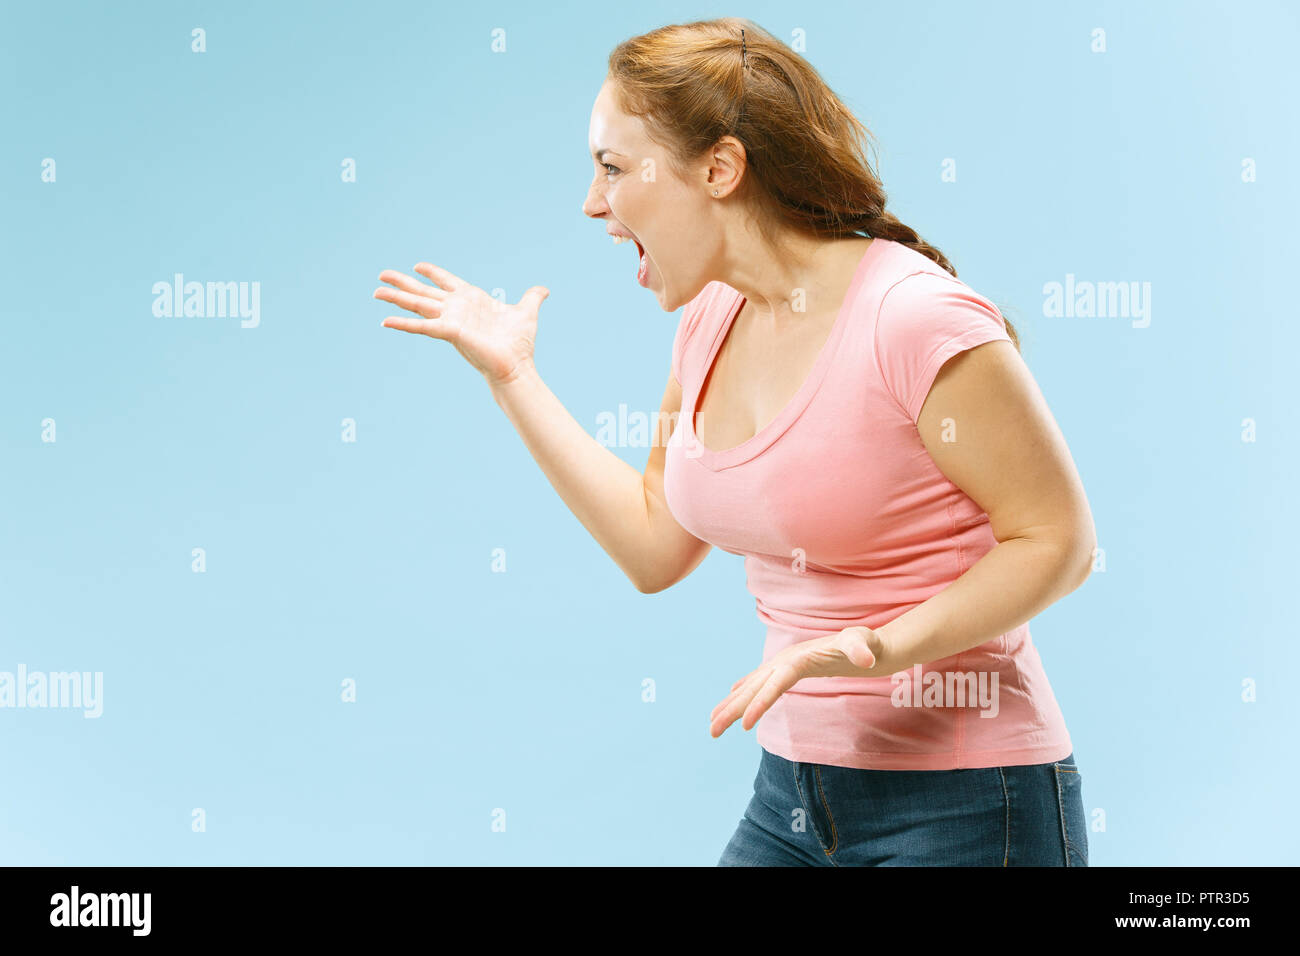 Argue, arguing concept. Beautiful female half-length portrait isolated on blue studio backgroud. Young emotional surprised woman looking at camera.Human emotions, facial expression concept. Stock Photo